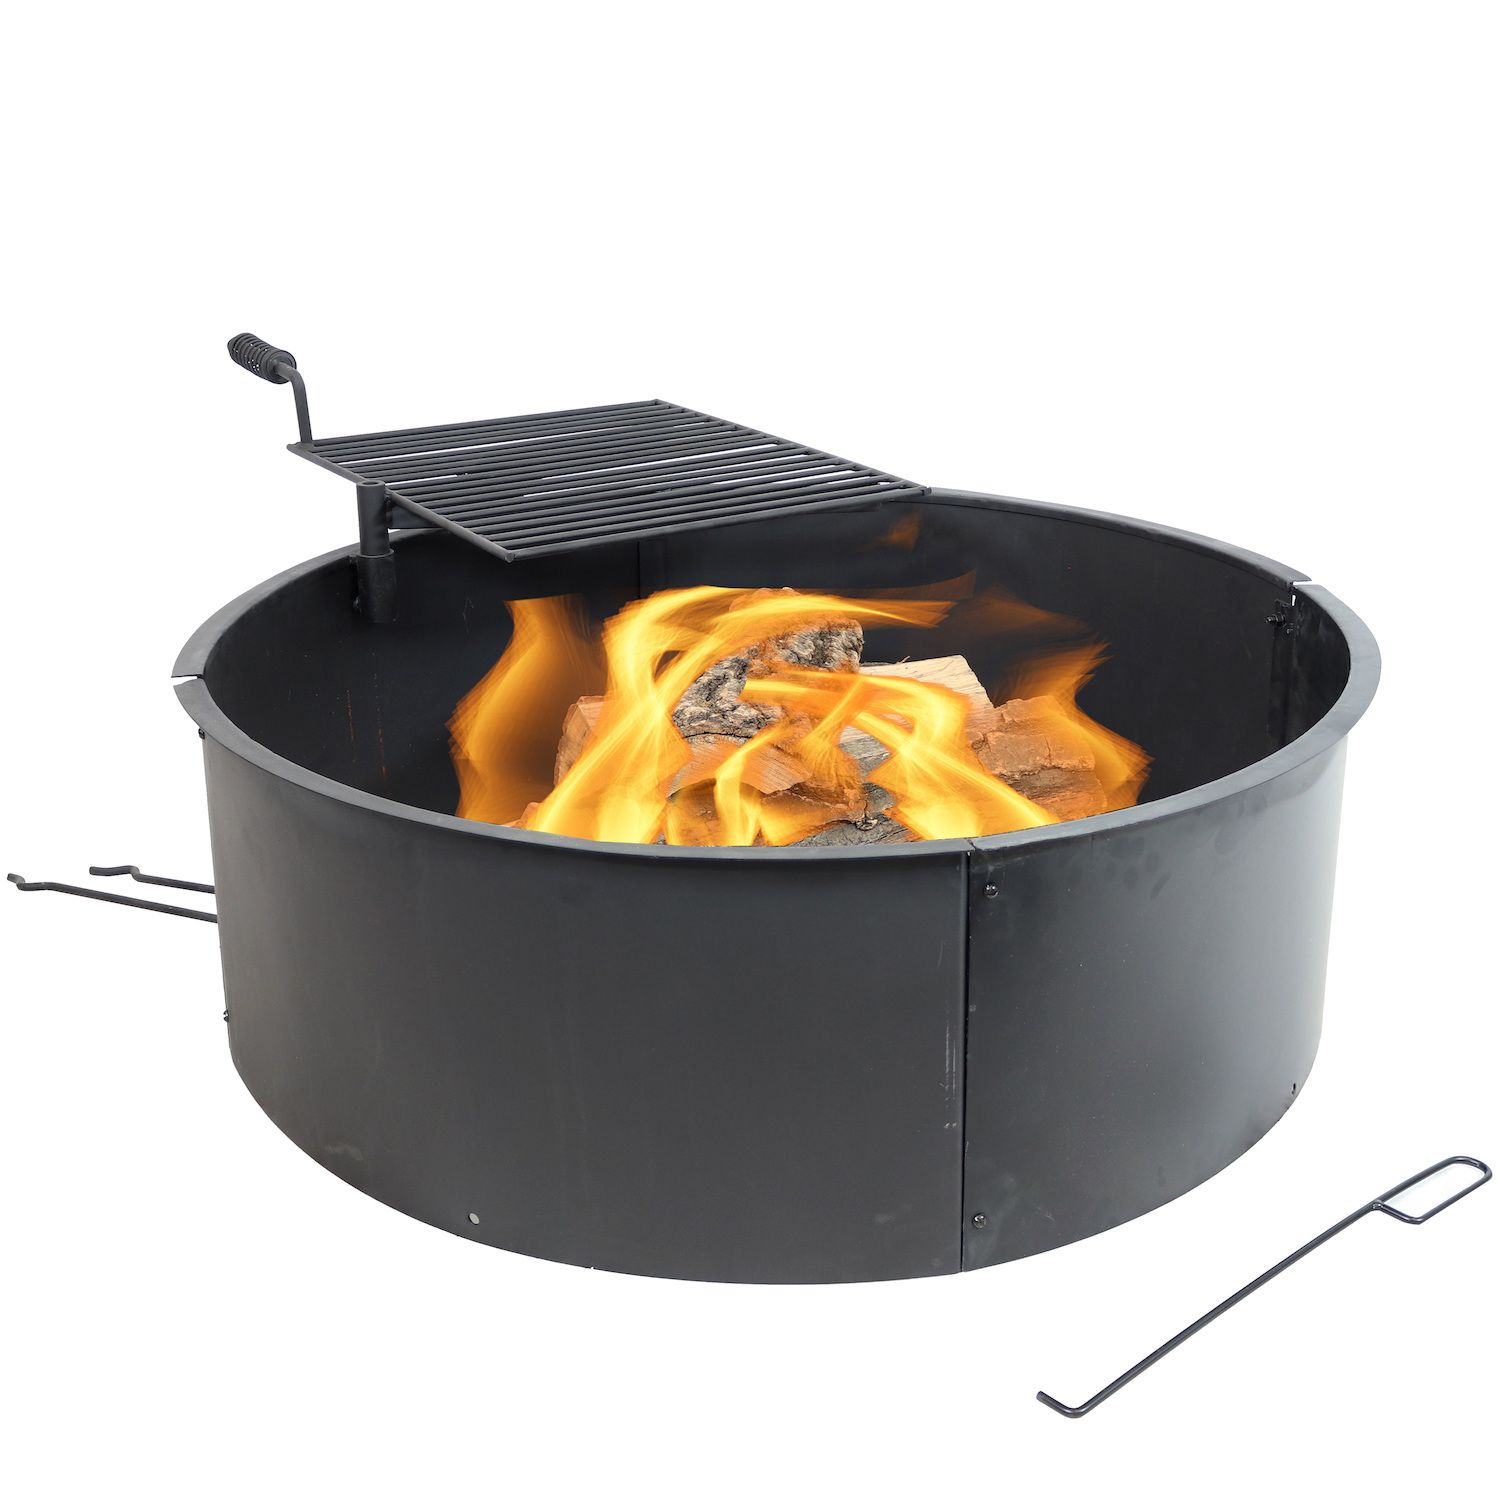 Cleanburn Fire Pit Griddle and Grill Top